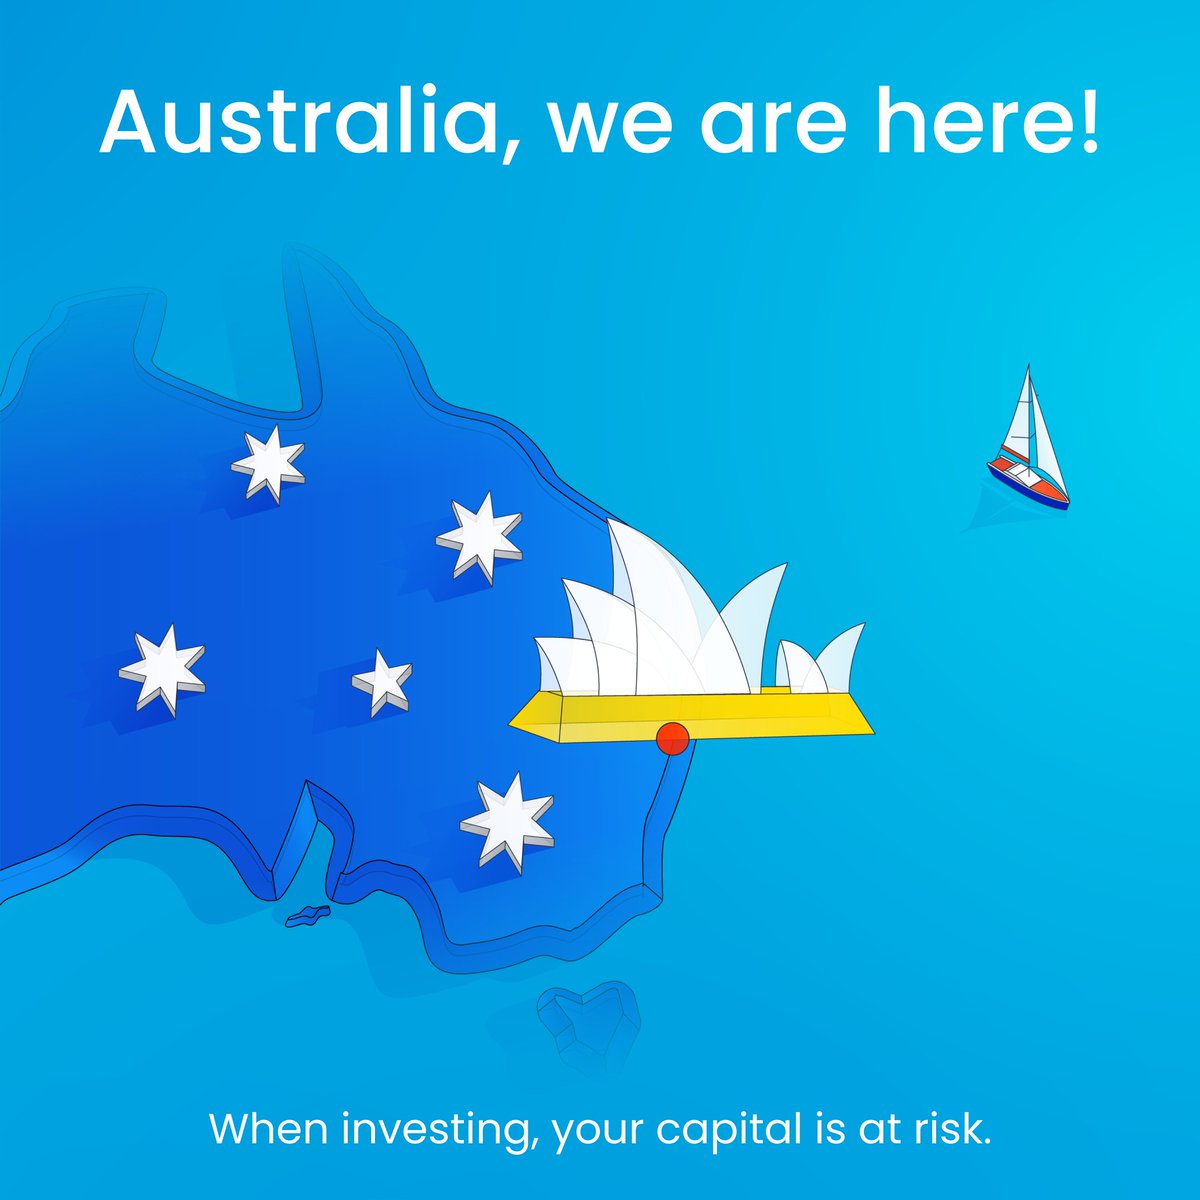 We revolutionised investing across Europe, yet our journey is far from over. We remain committed to our mission: ensuring that everyone, everywhere, has the opportunity to build wealth every day. And now, Australia, it's your turn. Here’s what we’re bringing: ✅ Unlimited